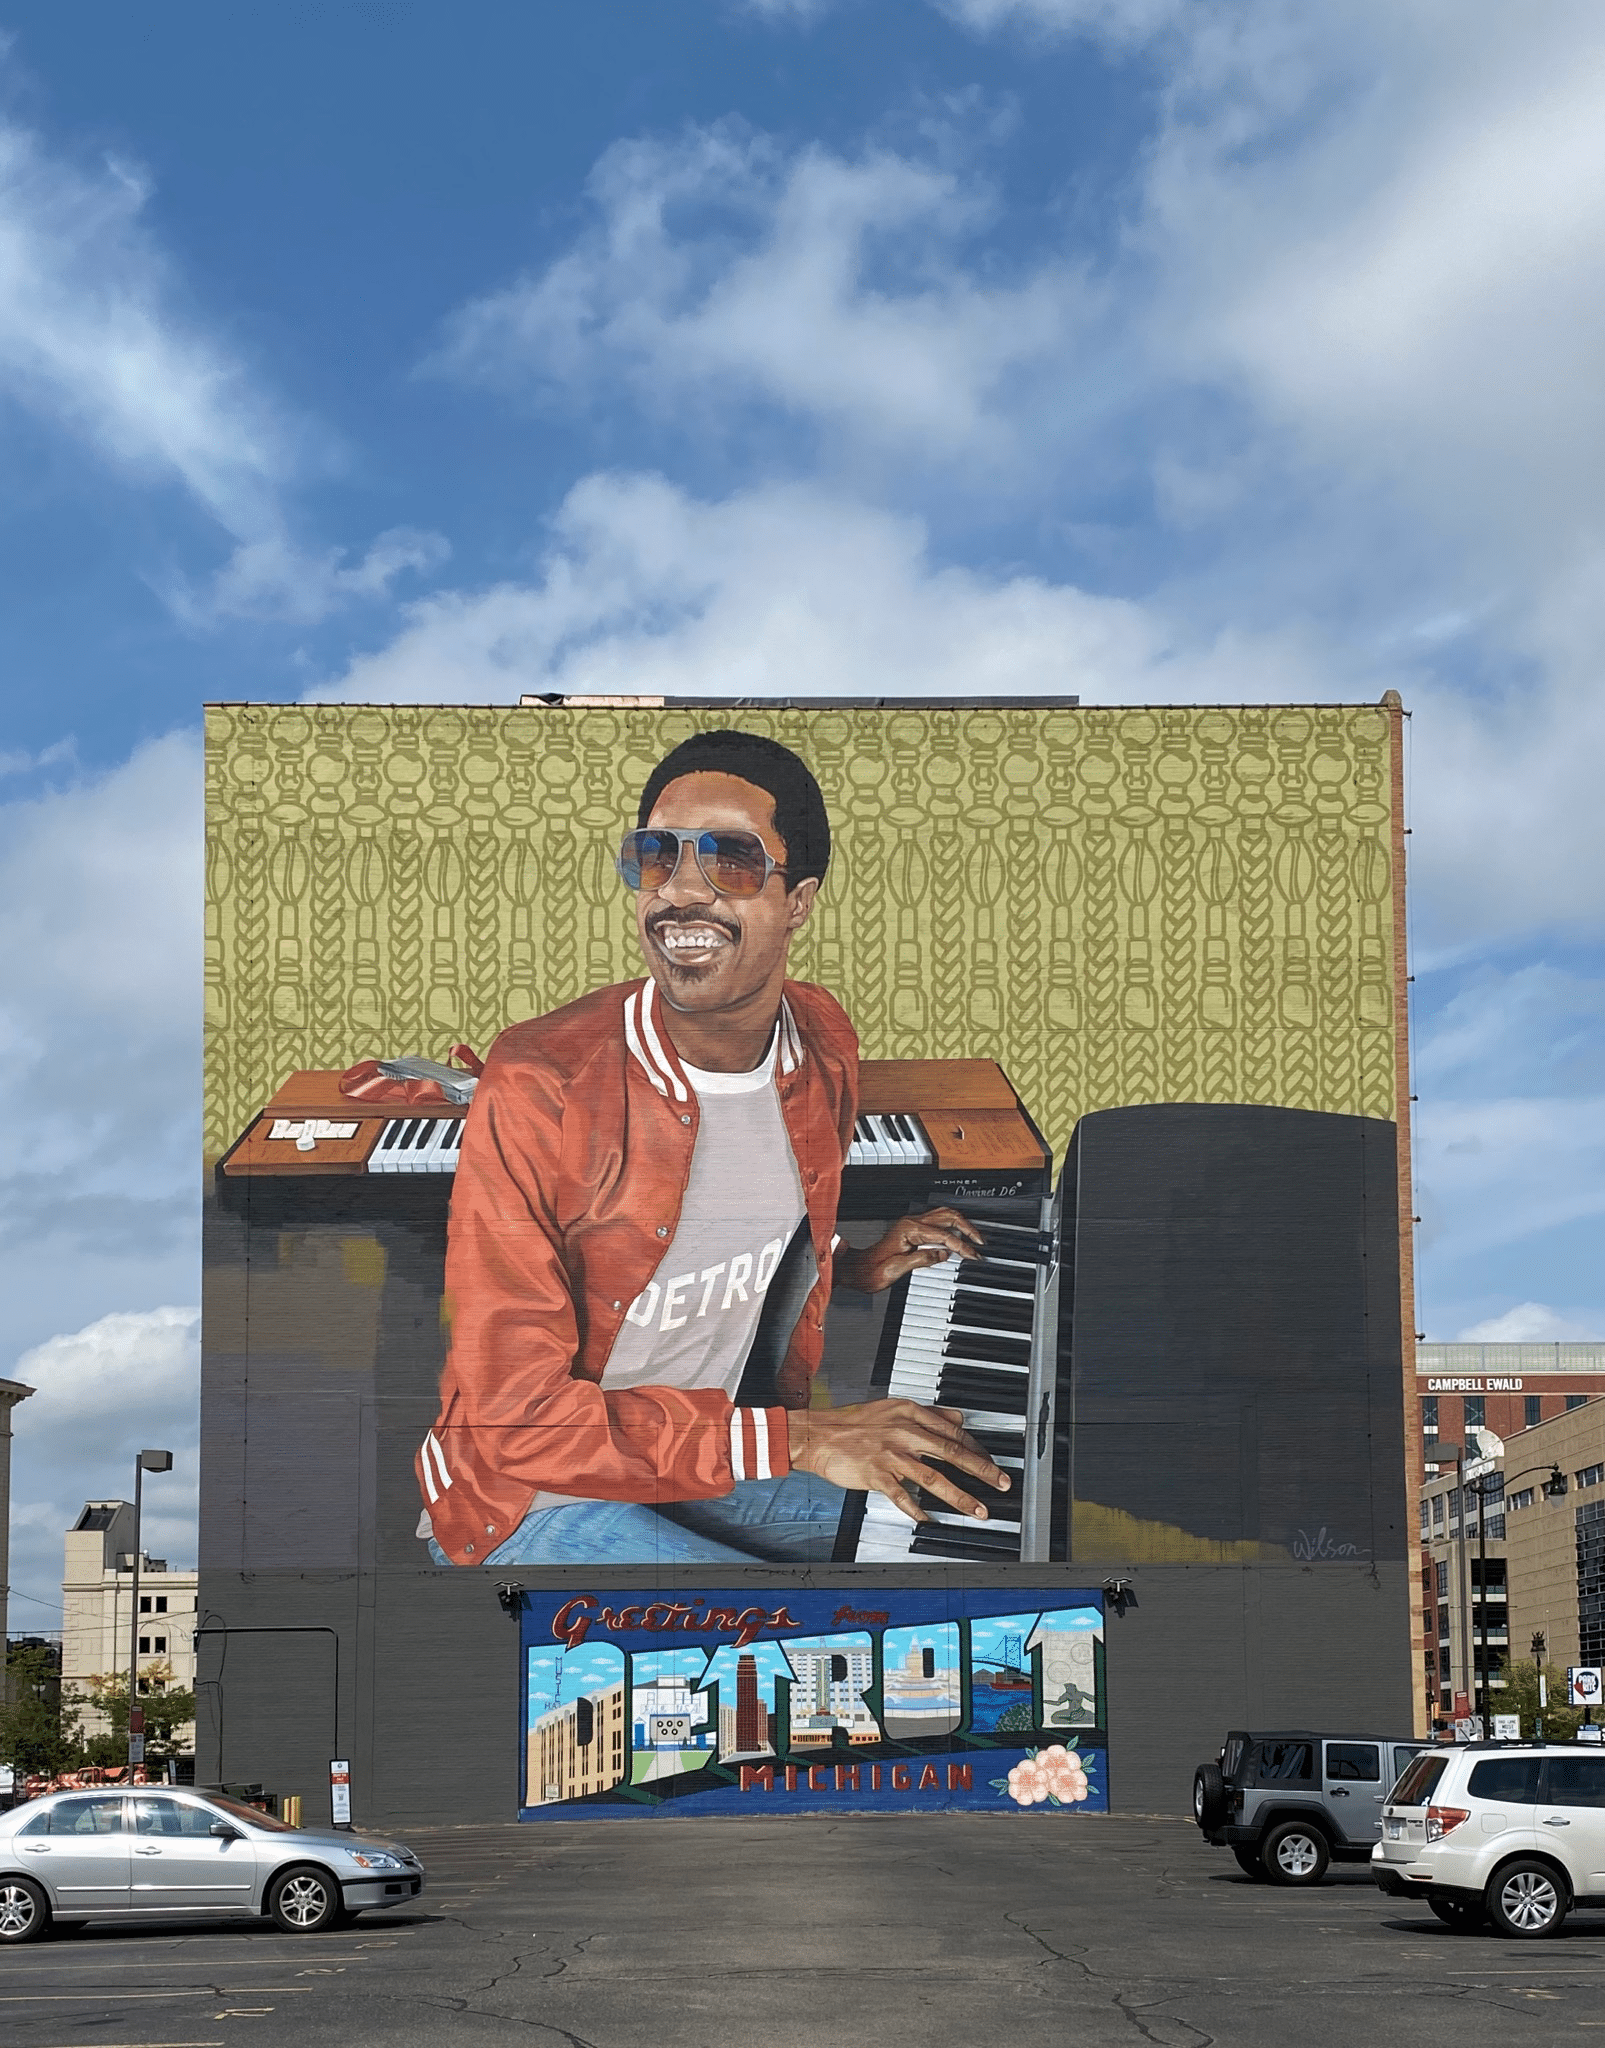 A mural of Stevie Wonder at the piano with Detroit spelled out beneath it